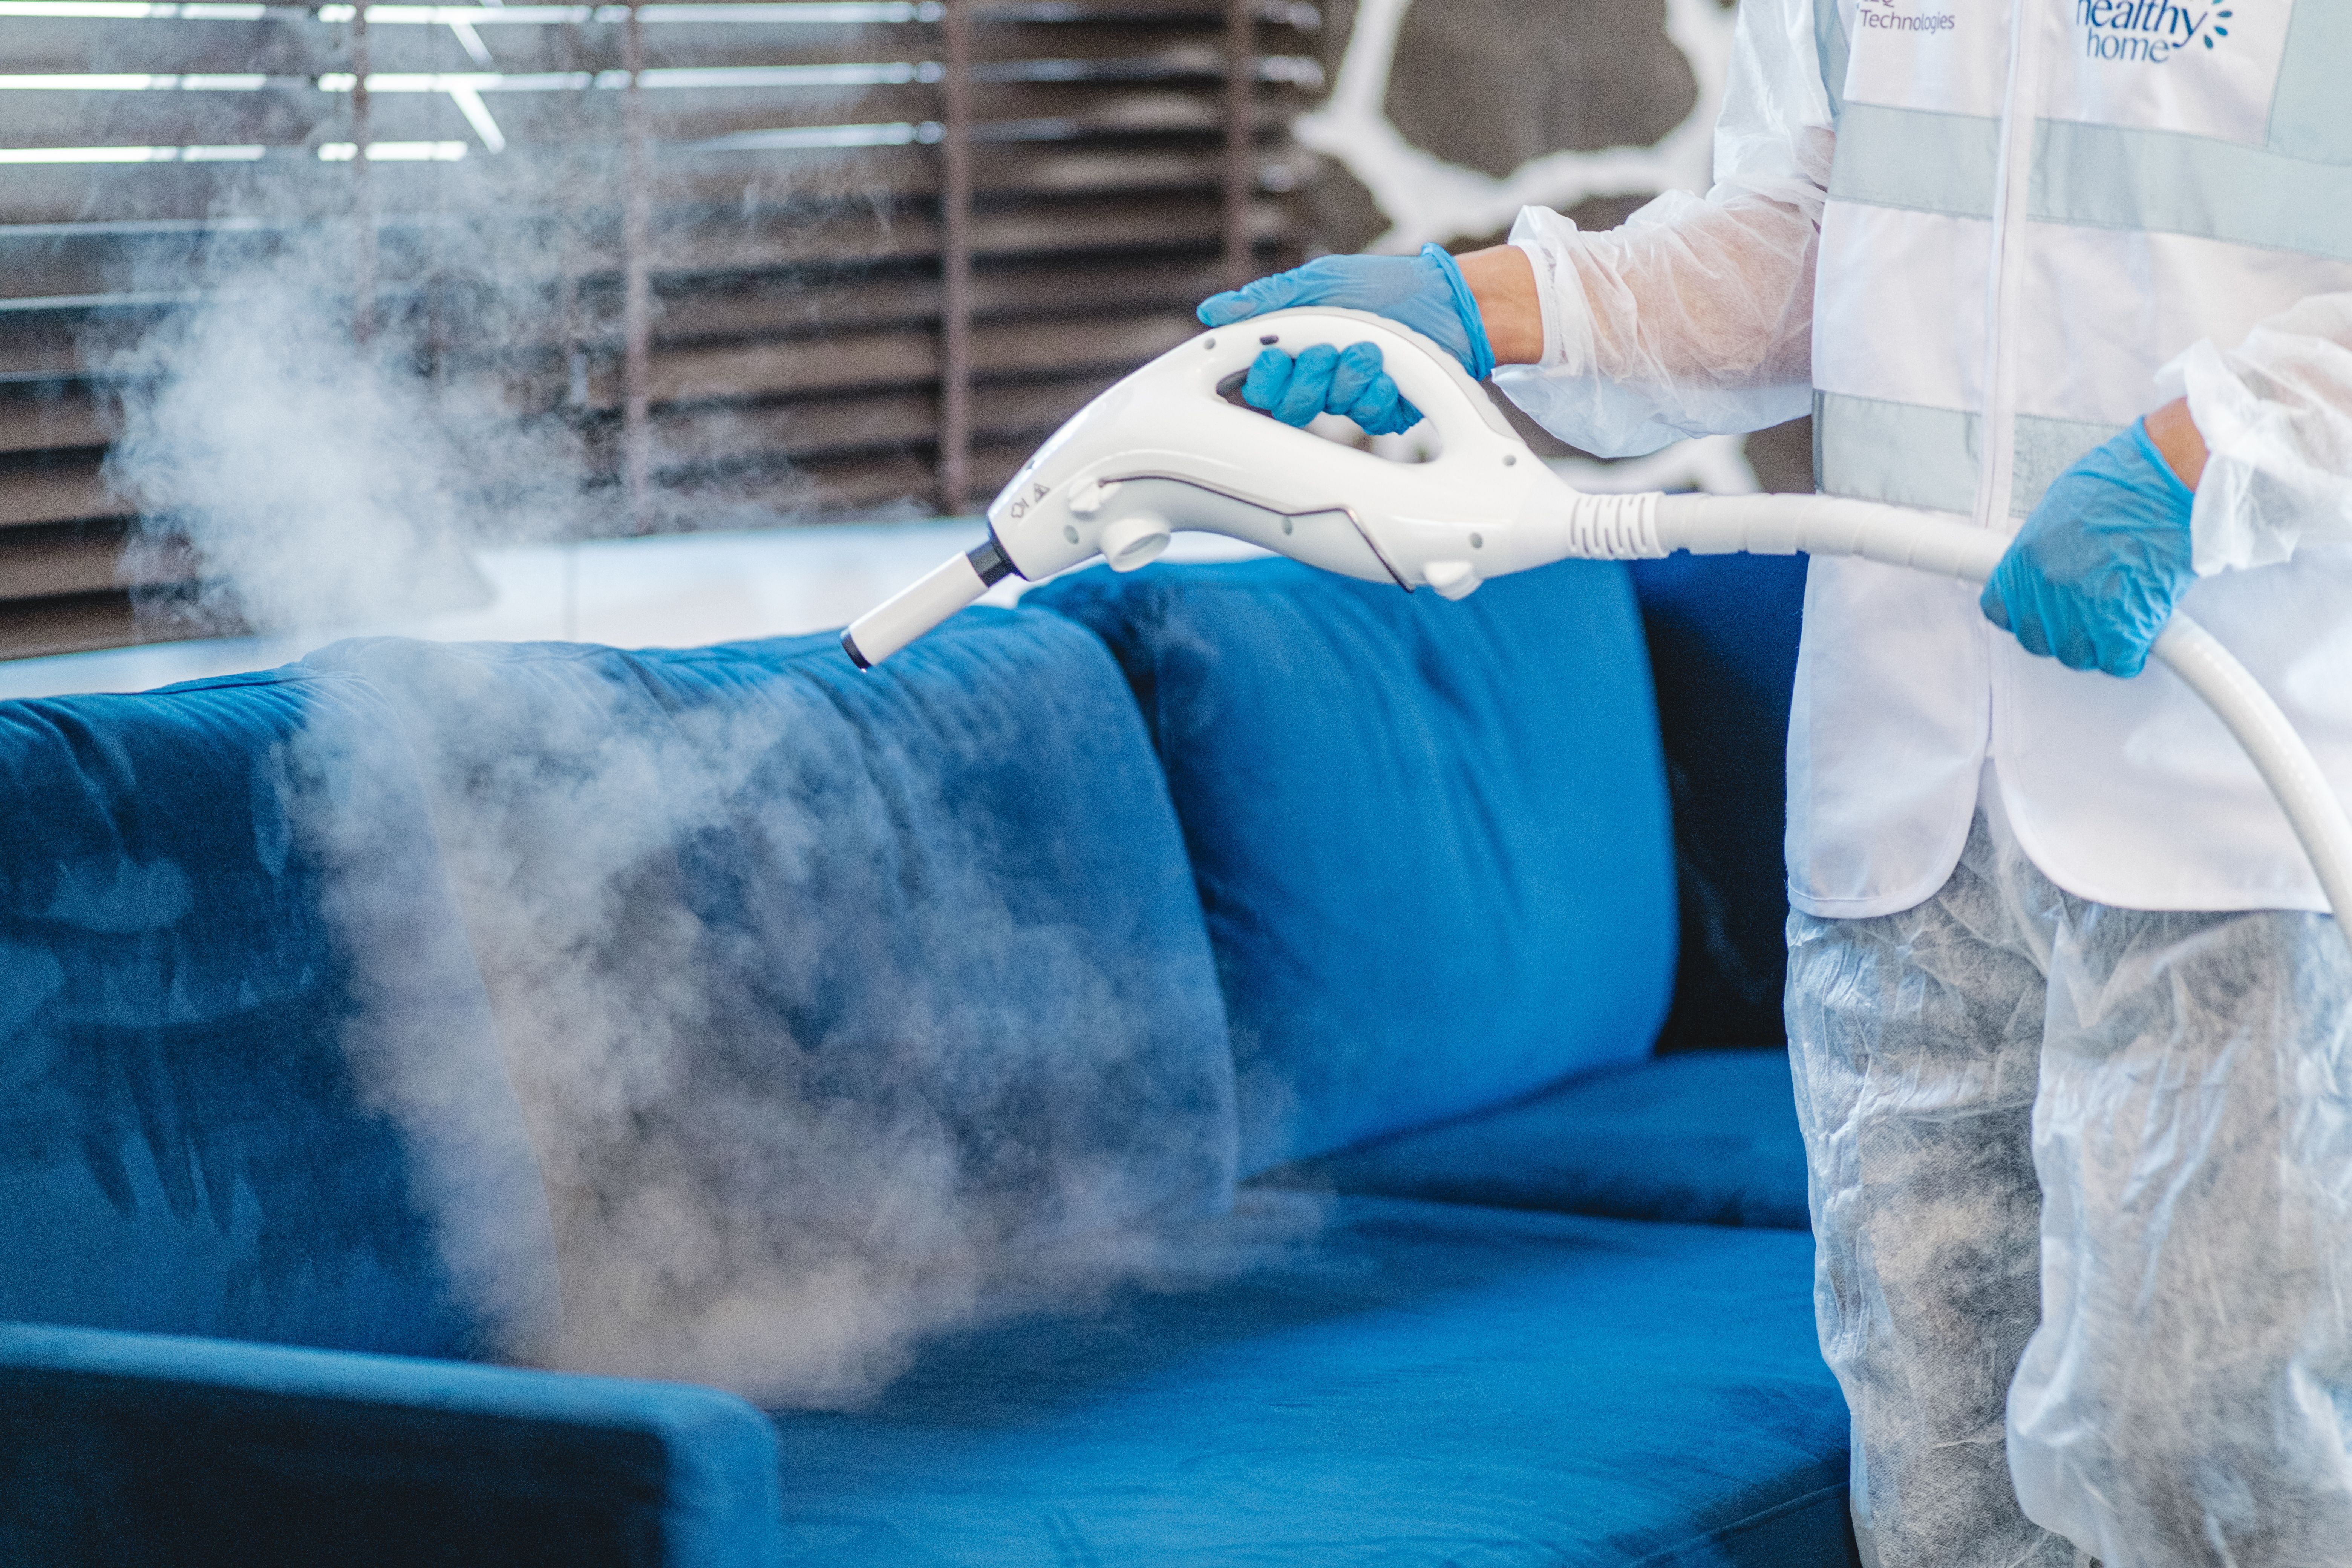 Sofa Cleaning and disinfection services by The Healthy Home